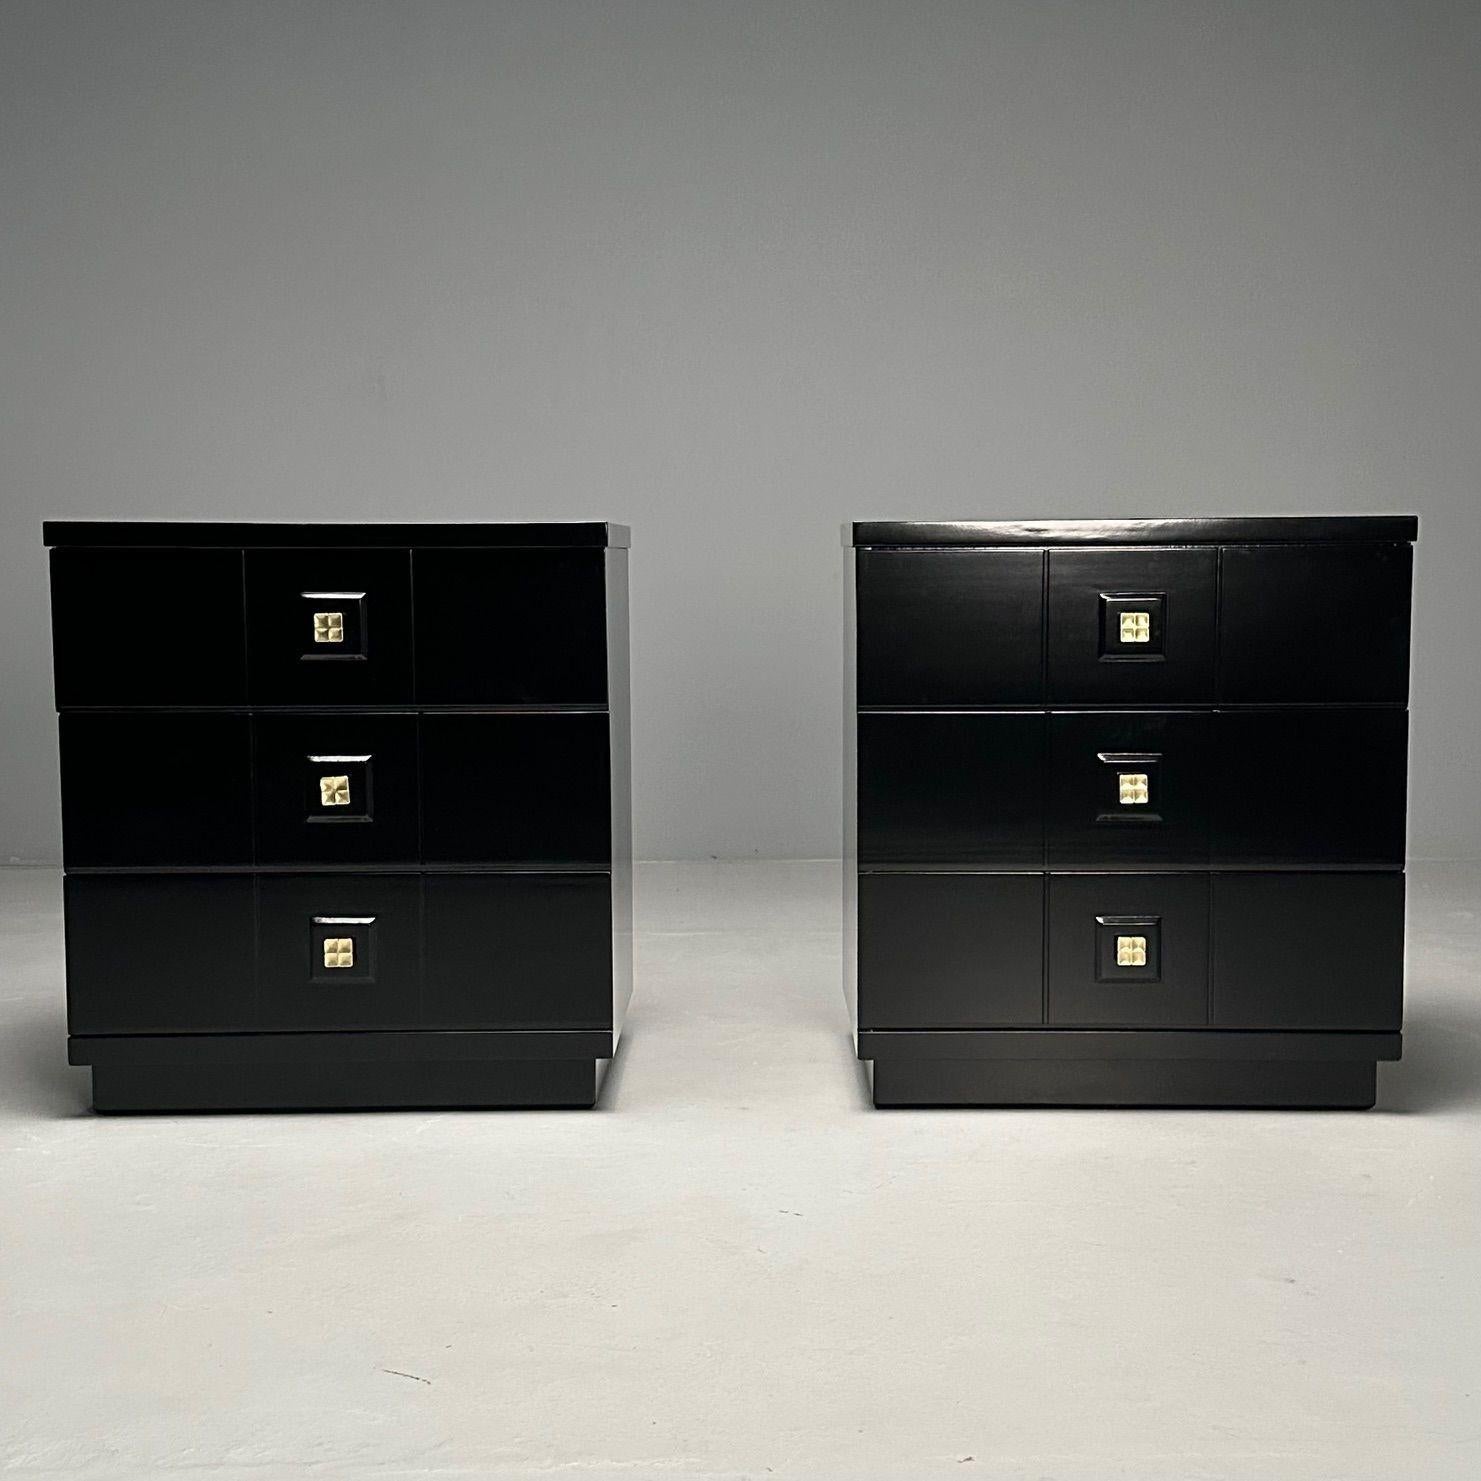 Mid-Century Modern, Chests of Drawers, Black Lacquer, Brass, USA, 1990s

Pair of sleek clean mid century modern chests or nightstands in the art deco fashion. Each of this recently refinished chest have three drawers and a center square brass drawer